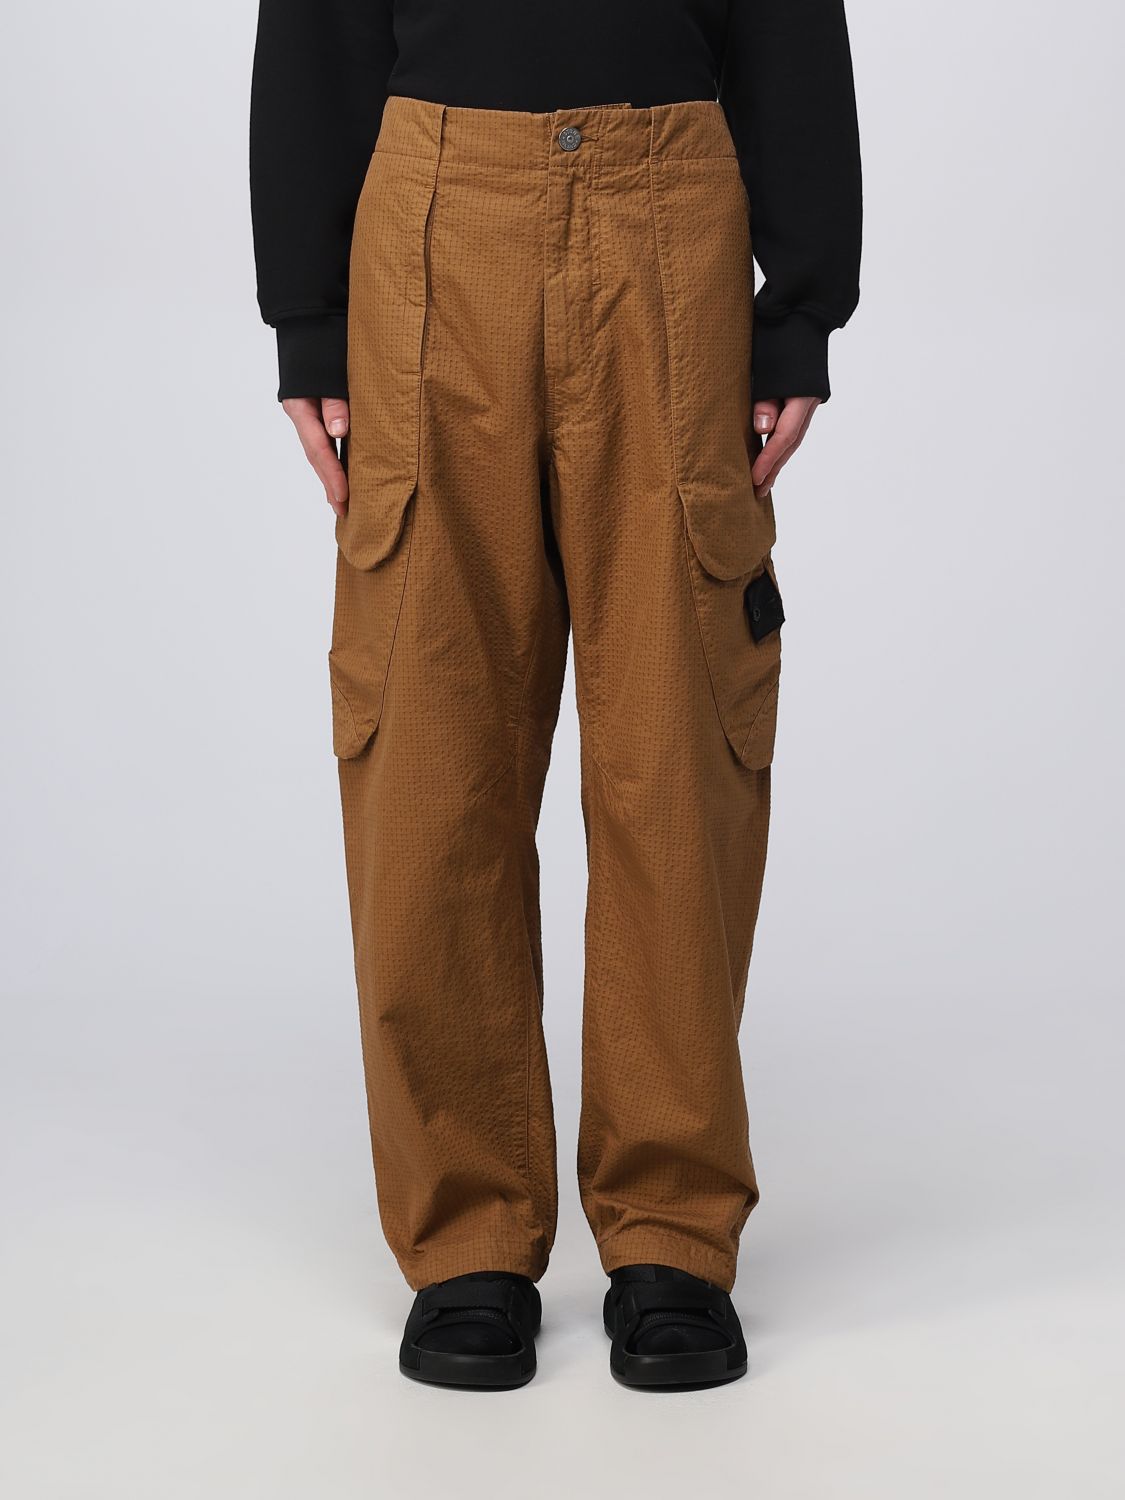 STONE ISLAND SHADOW PROJECT PANTS STONE ISLAND SHADOW PROJECT MEN COLOR BROWN,E06116032